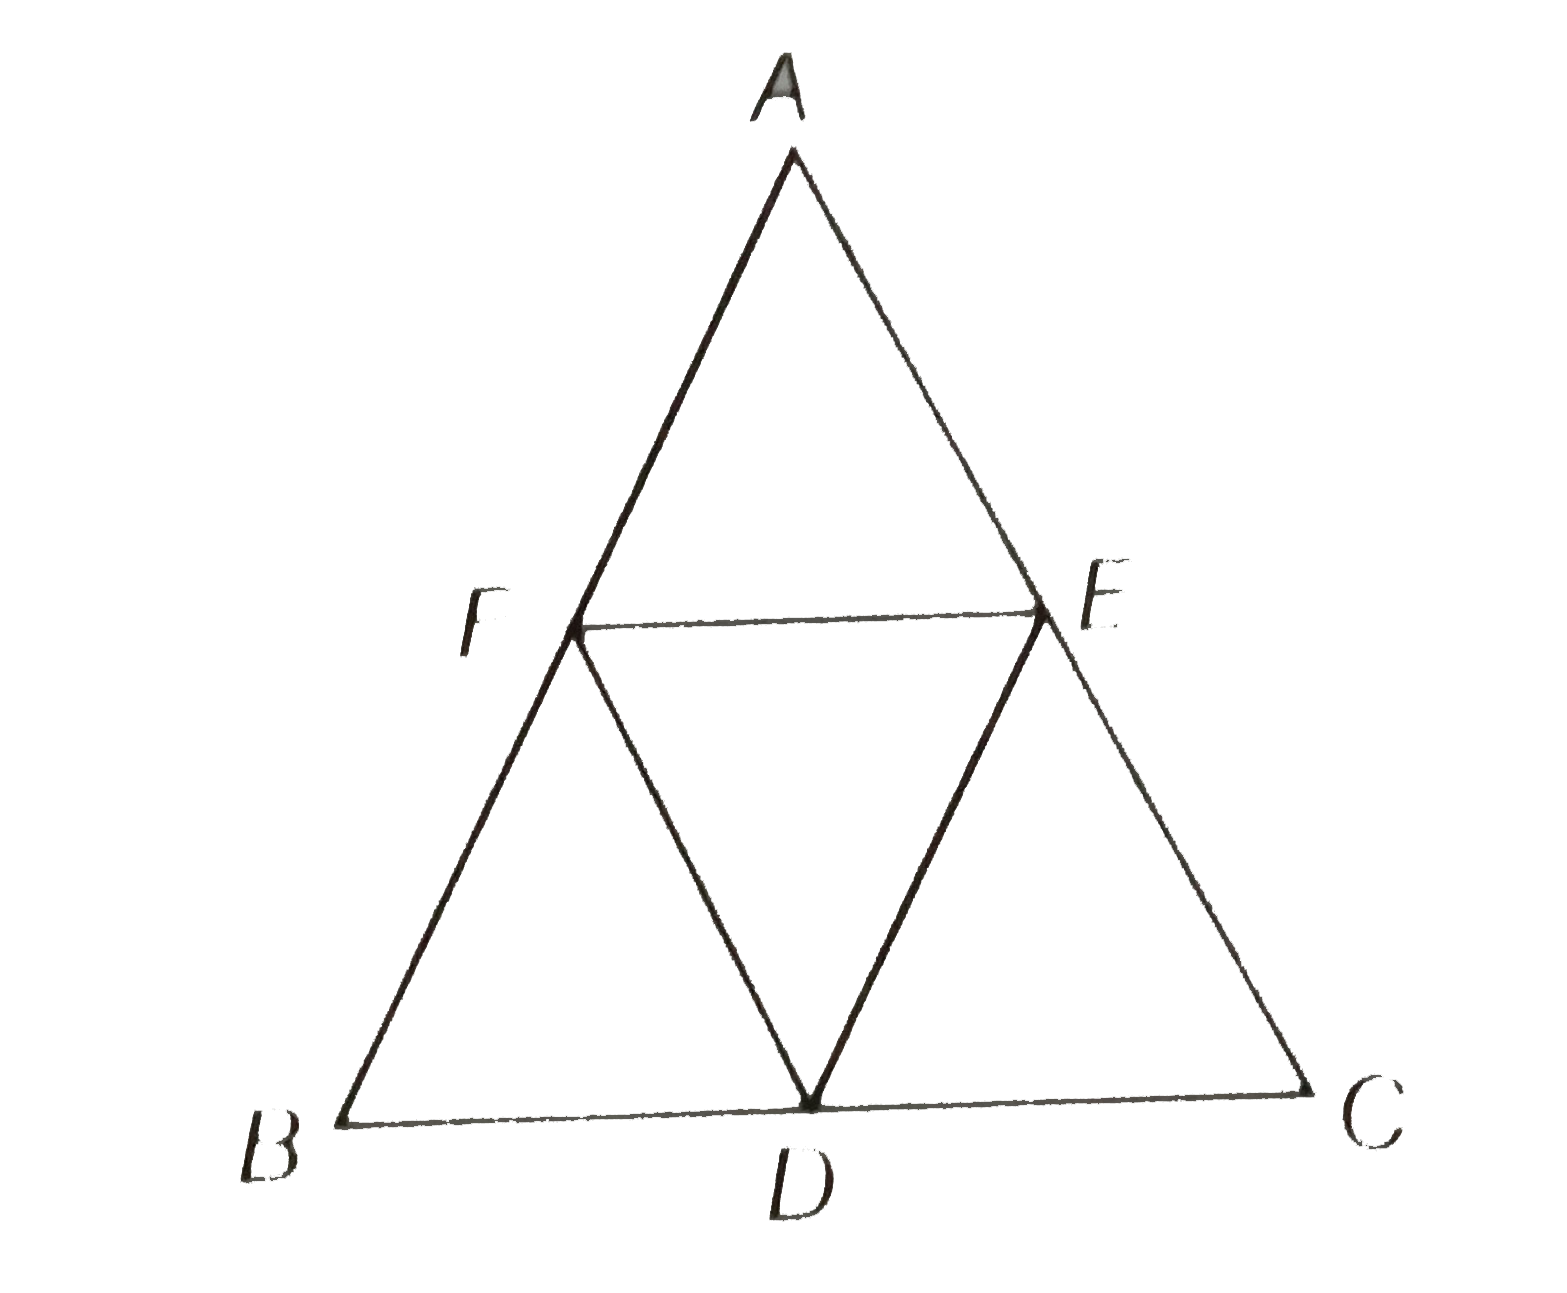 In the figure, it is given that BDEF and FDCE are parallelogram. Can you say that BD = CD ? Why or why not?